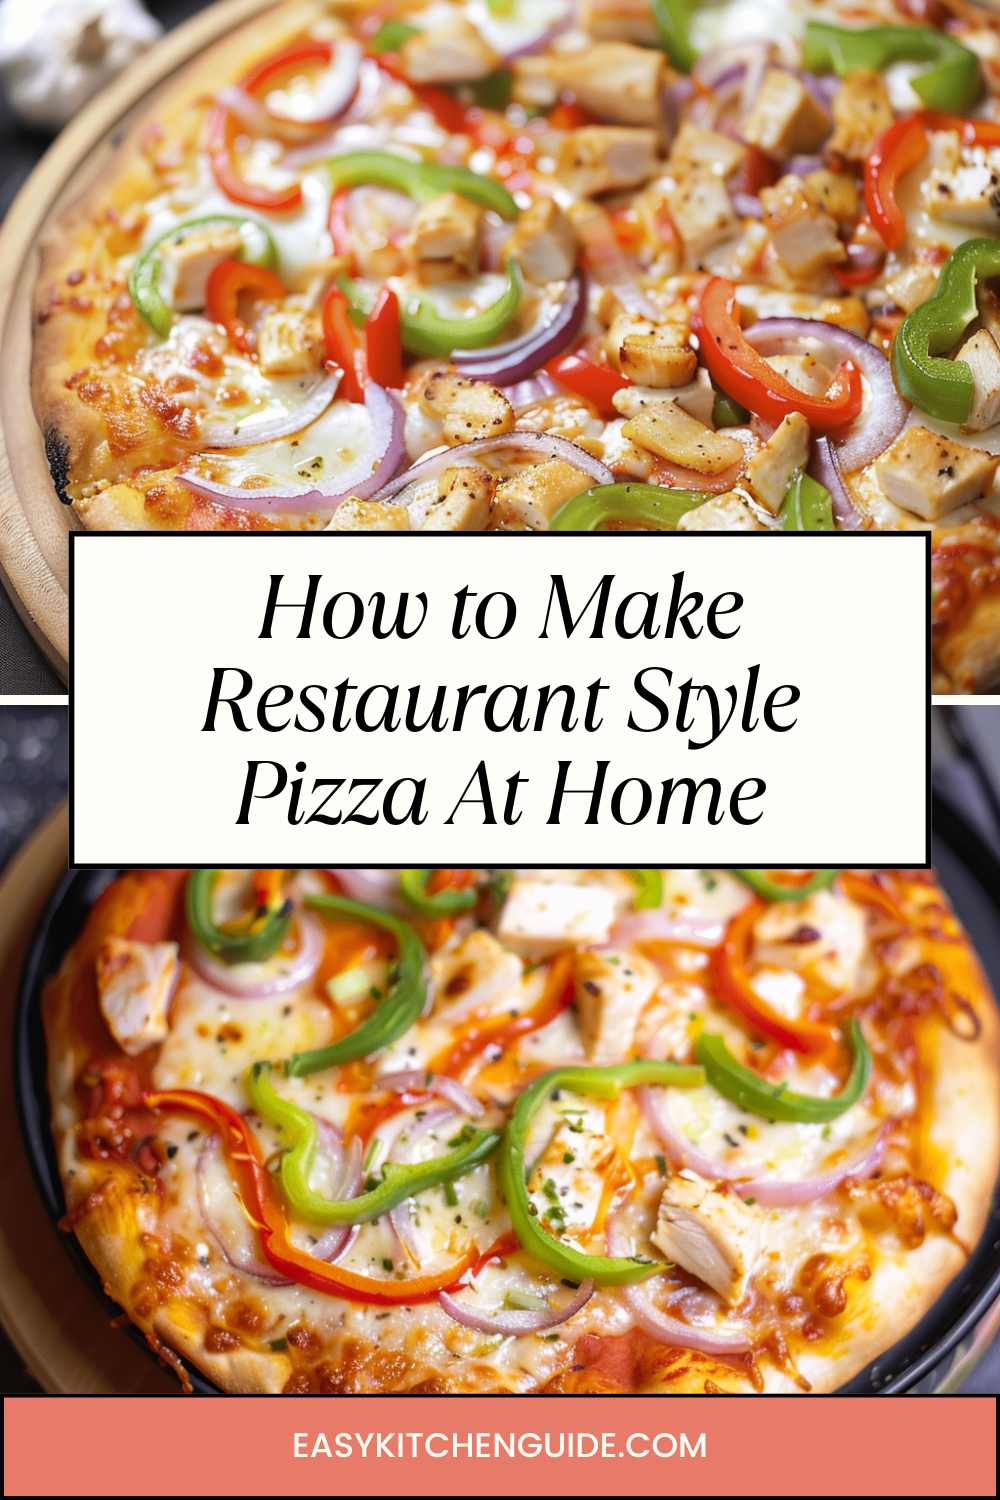 Making Restaurant Style Pizza At Home